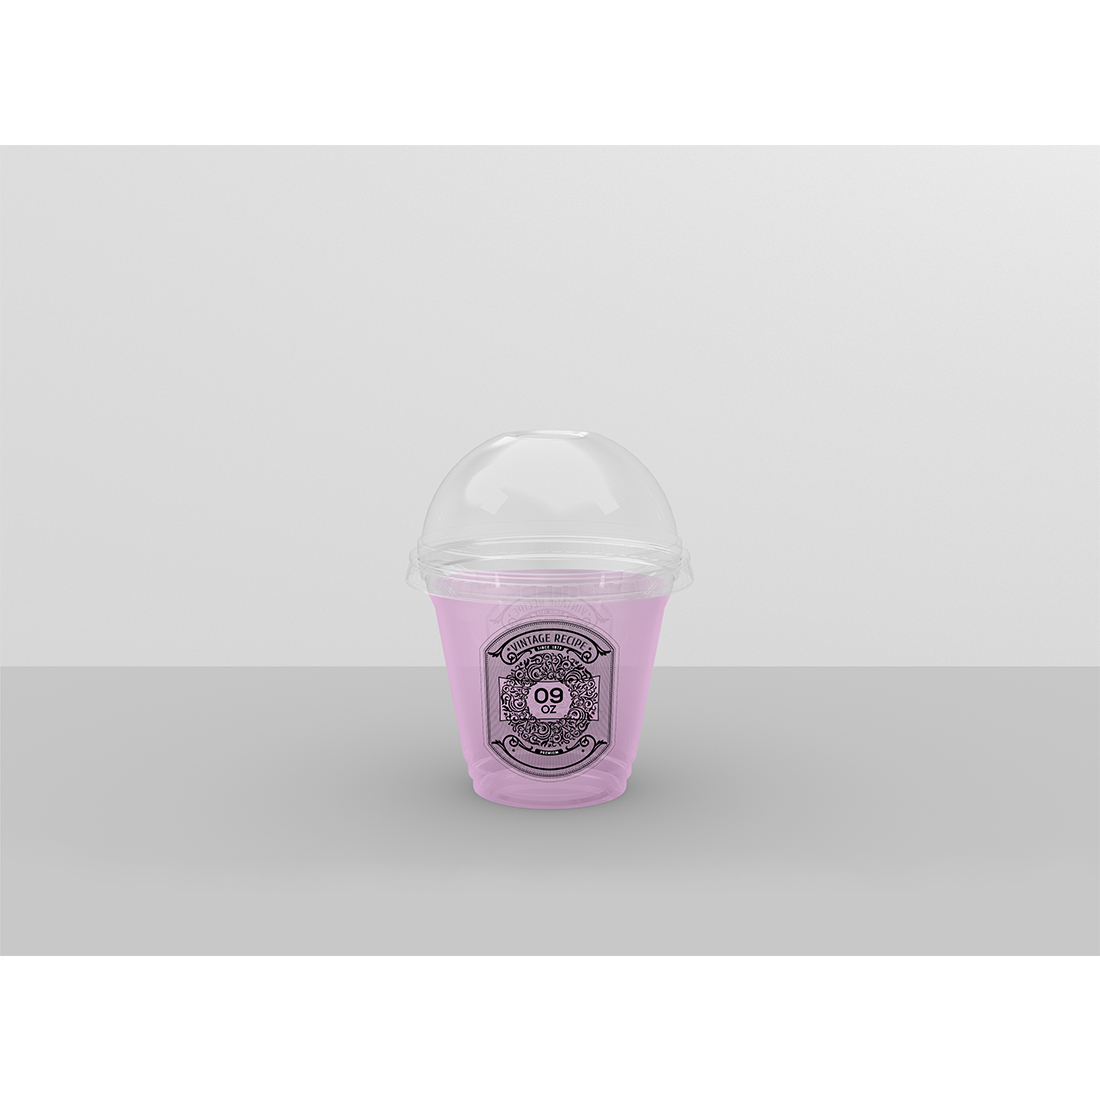 Clear Cold Drink Cup Packaging Mockup - 9 to 24 Oz cover image.